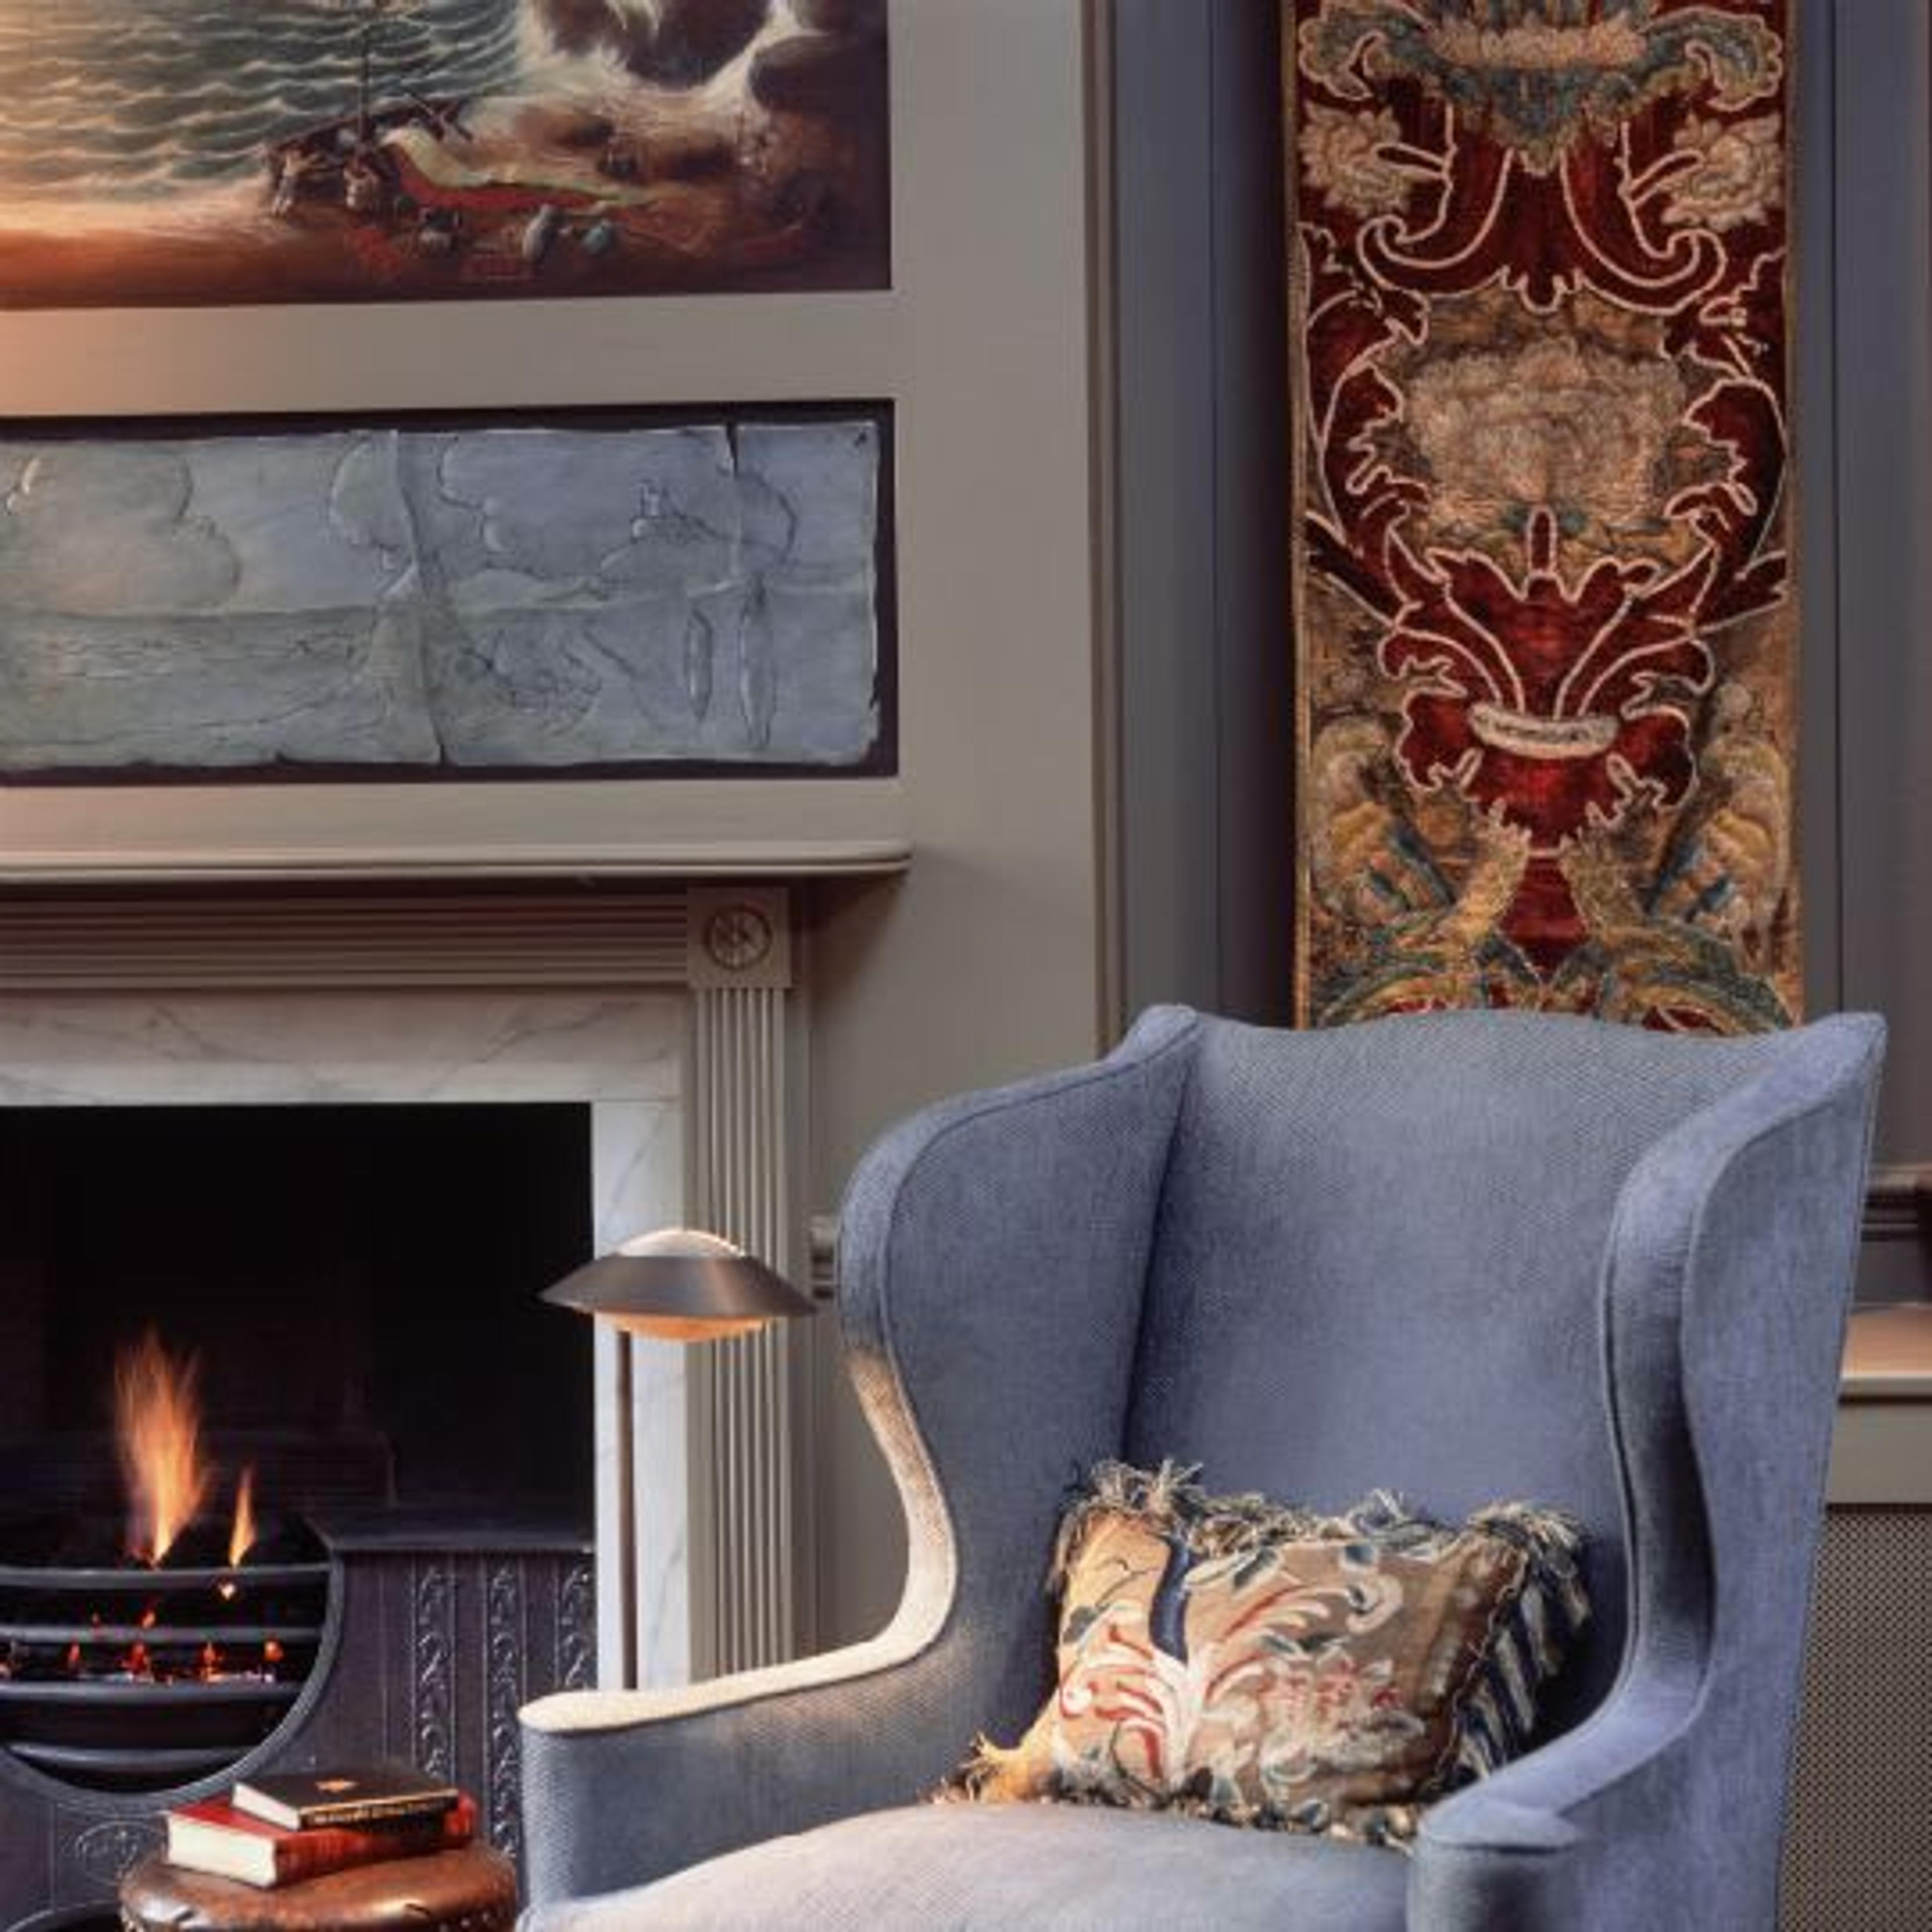 London Townhouse details of fireplace décor by Malcolm Kutner